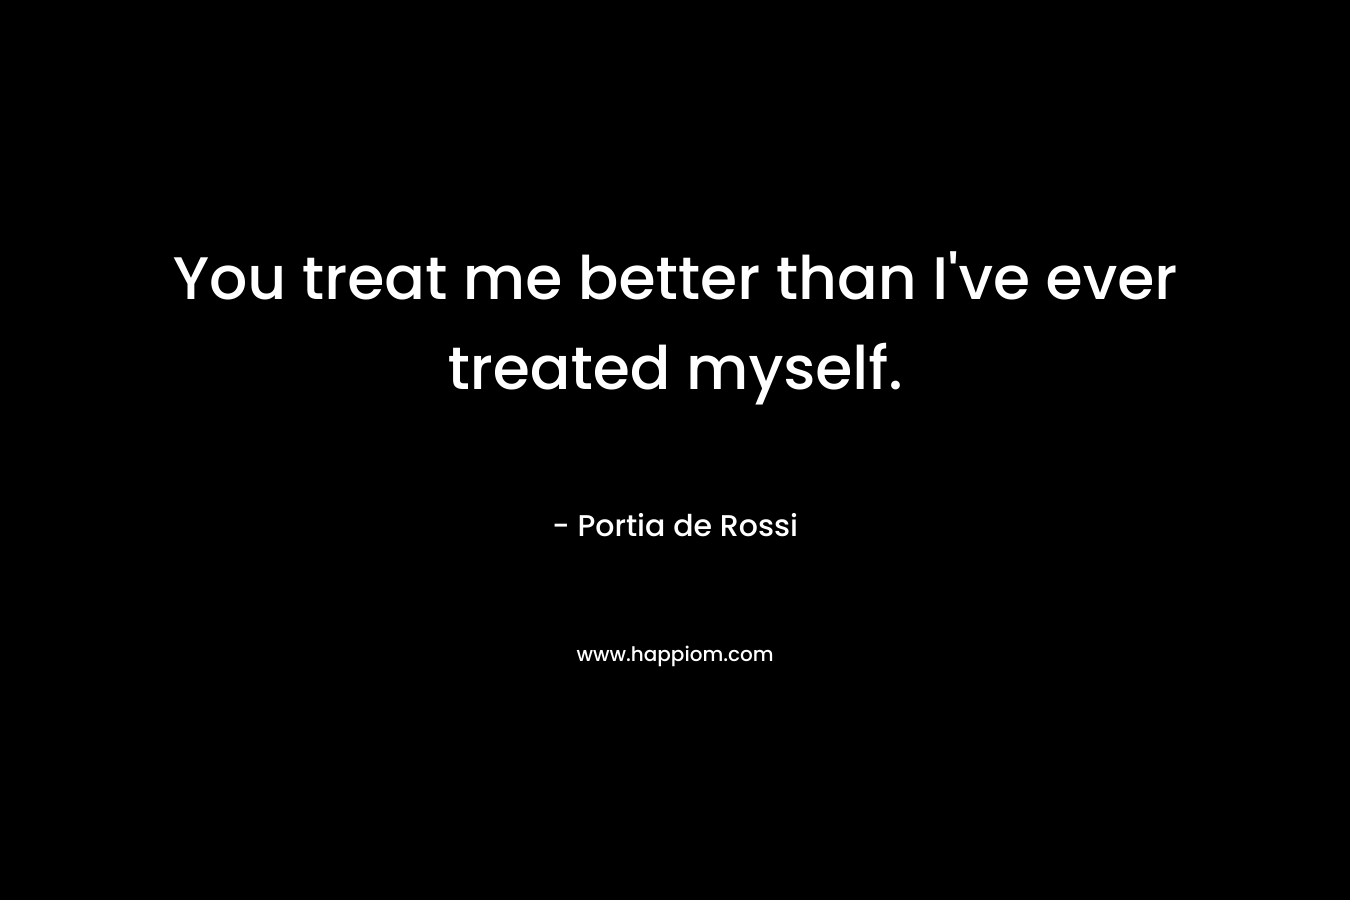 You treat me better than I've ever treated myself.